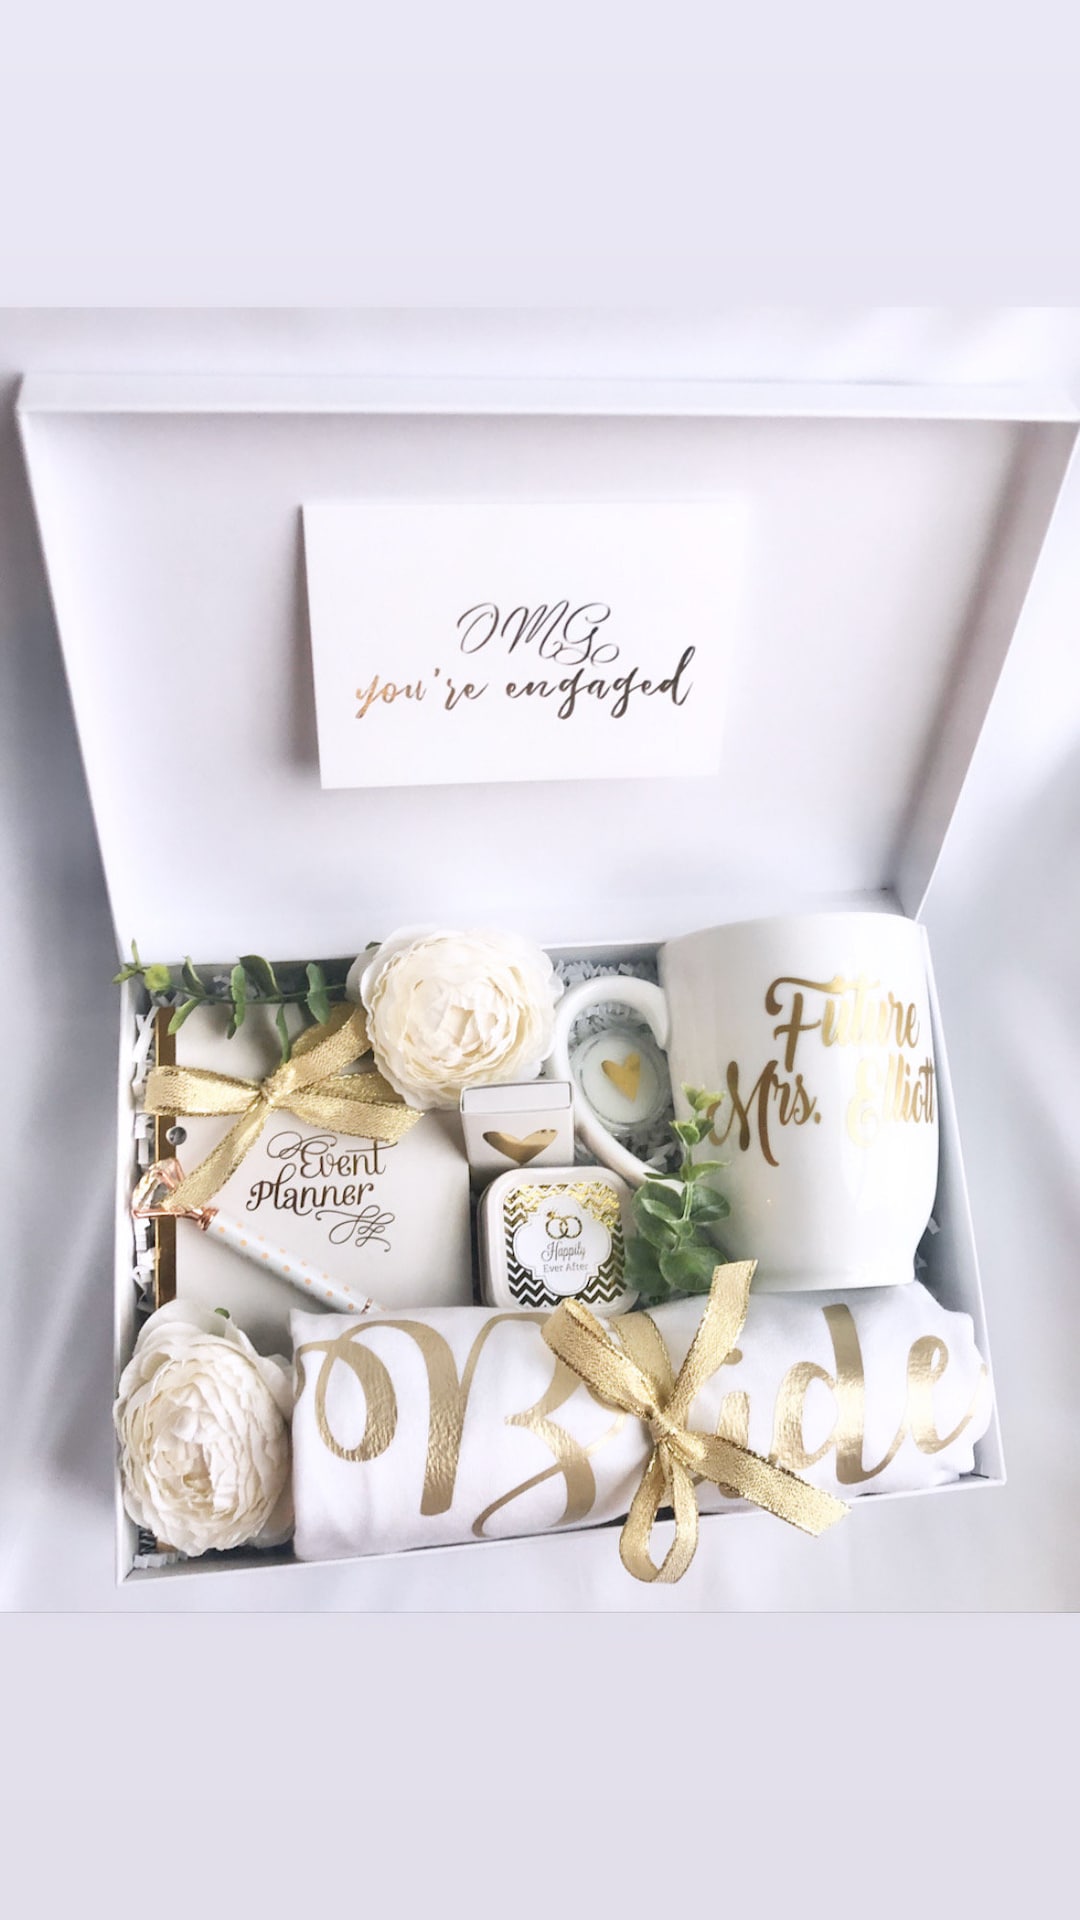 Bridal Shower Gifts for Bride to Be,Wedding Gifts for Couples 2024,Cool Engagement Gifts for Couples,Bachelorette Gifts for Bride,Mr and Mrs Gifts